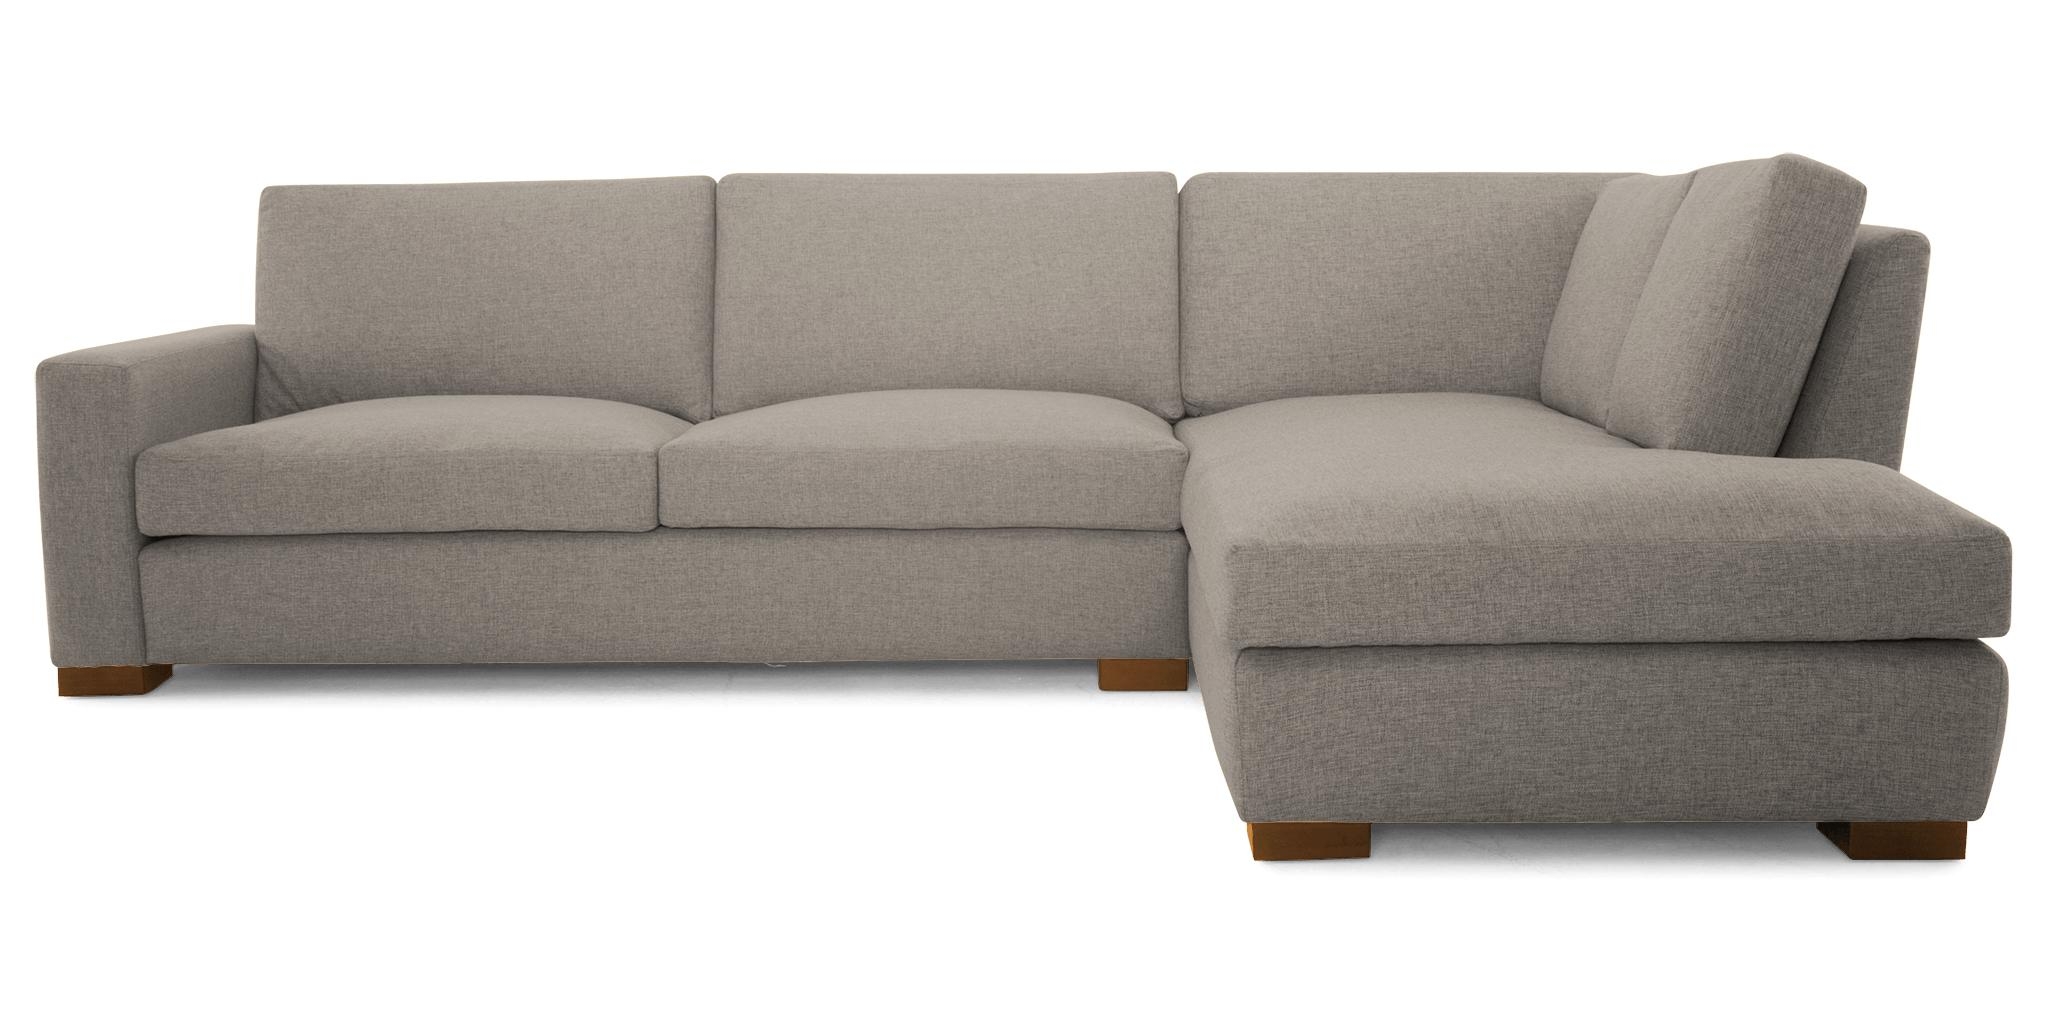 Gray Anton Mid Century Modern Sectional with Bumper - Prime Stone - Mocha - Right  - Image 0